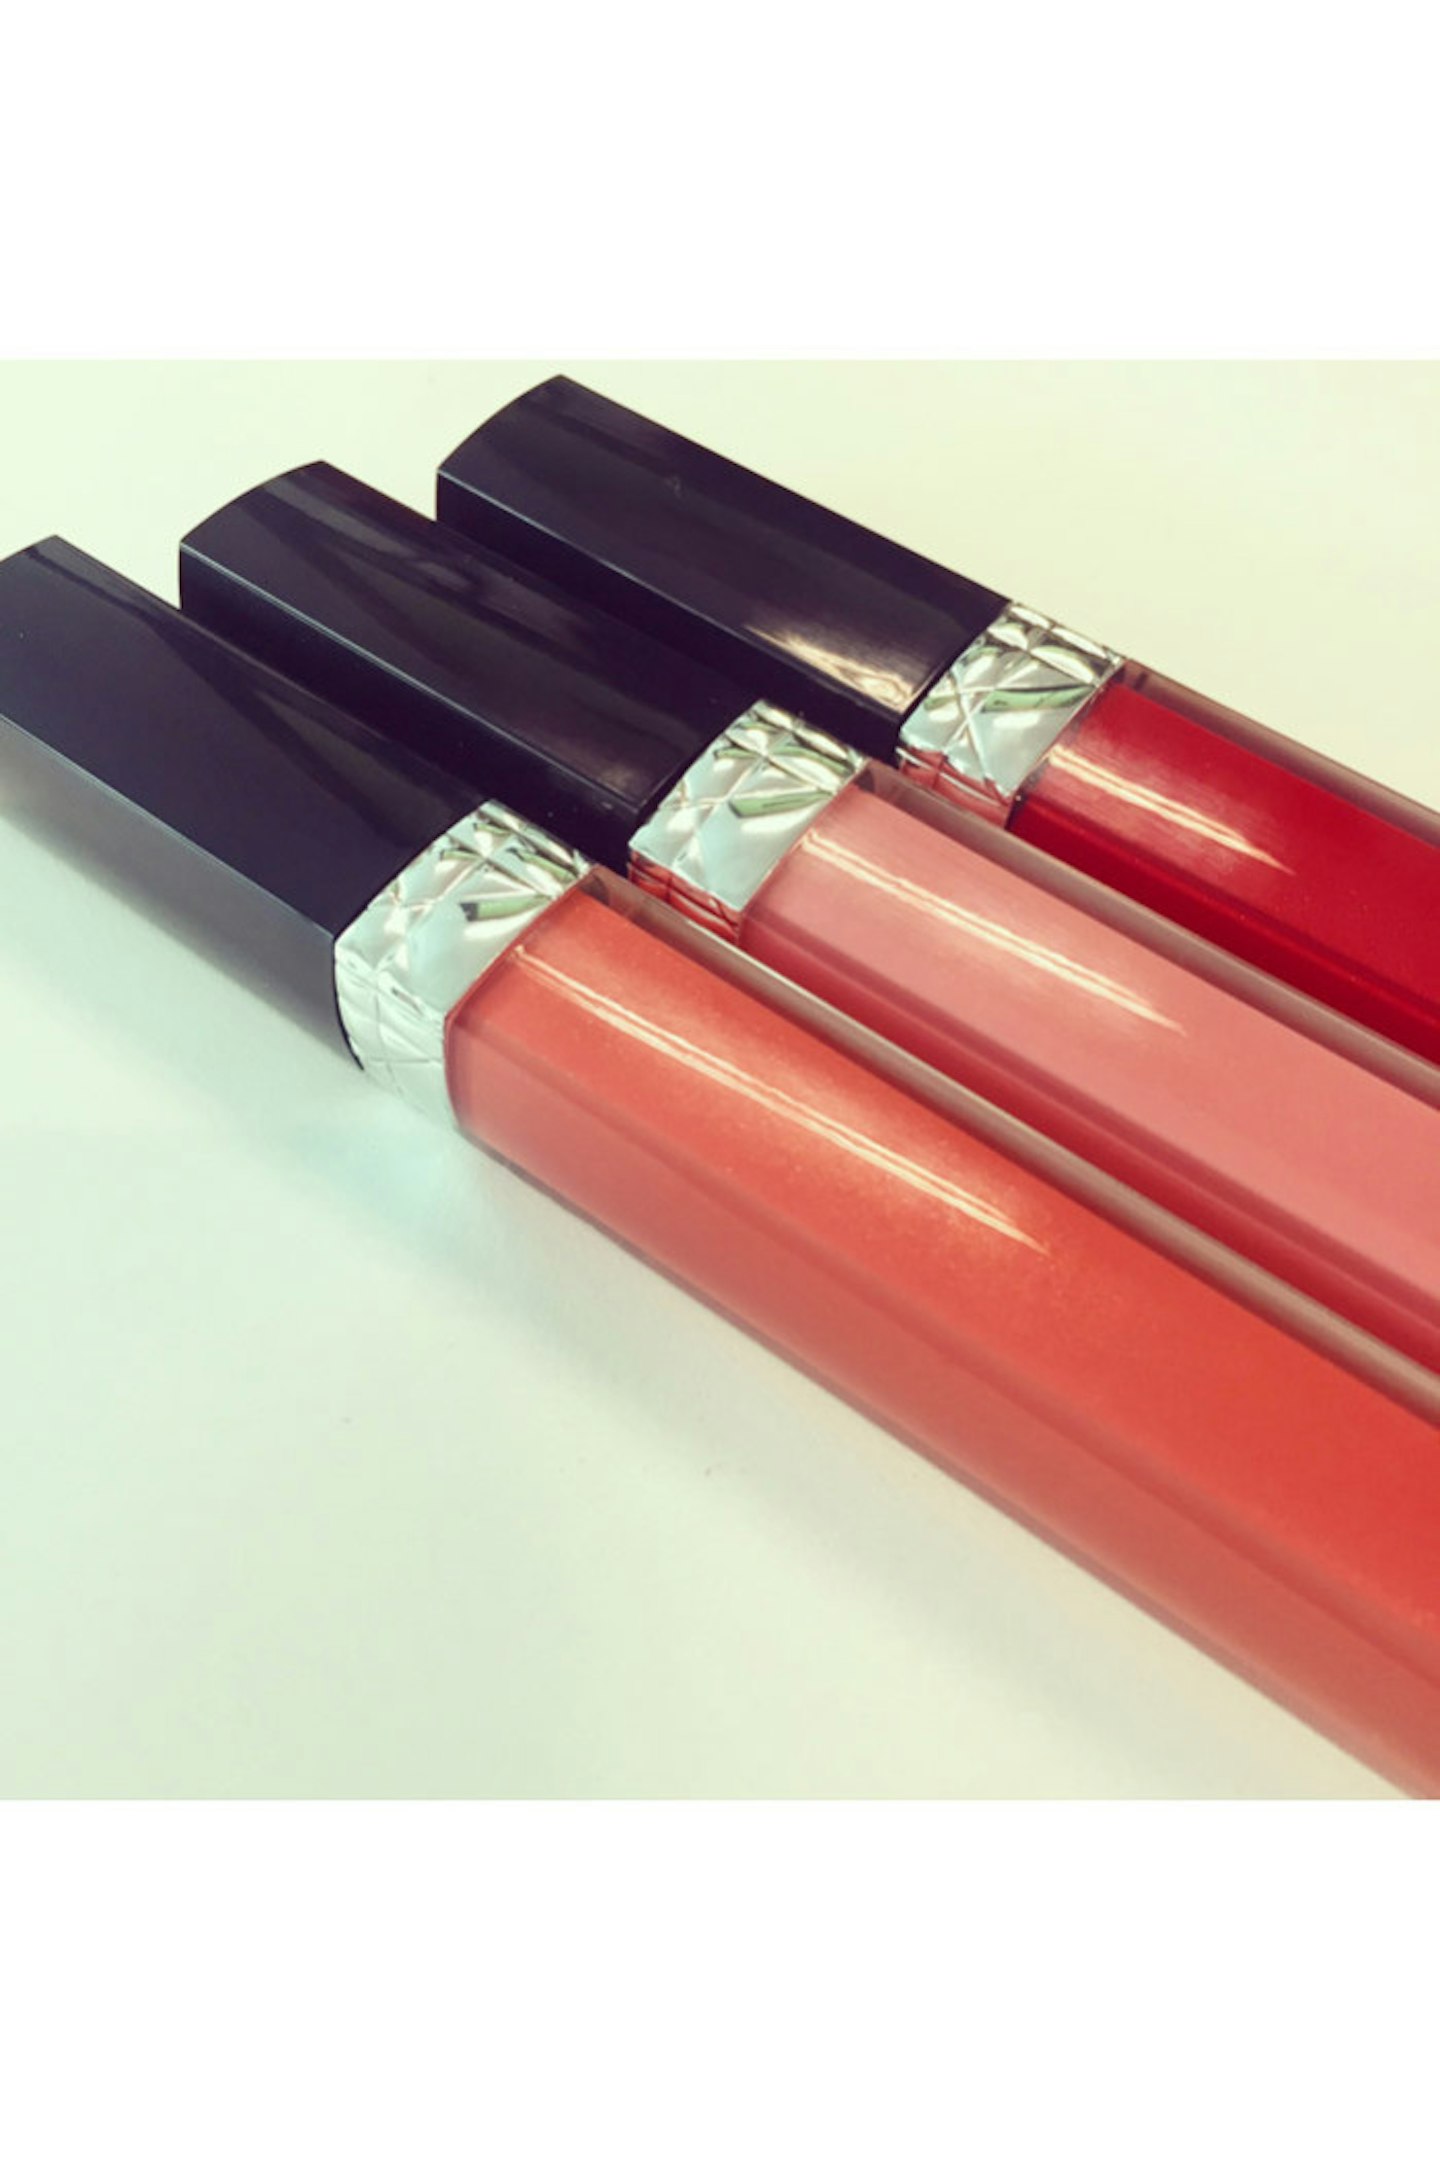 Dior Rouge Brilliantly Glosses